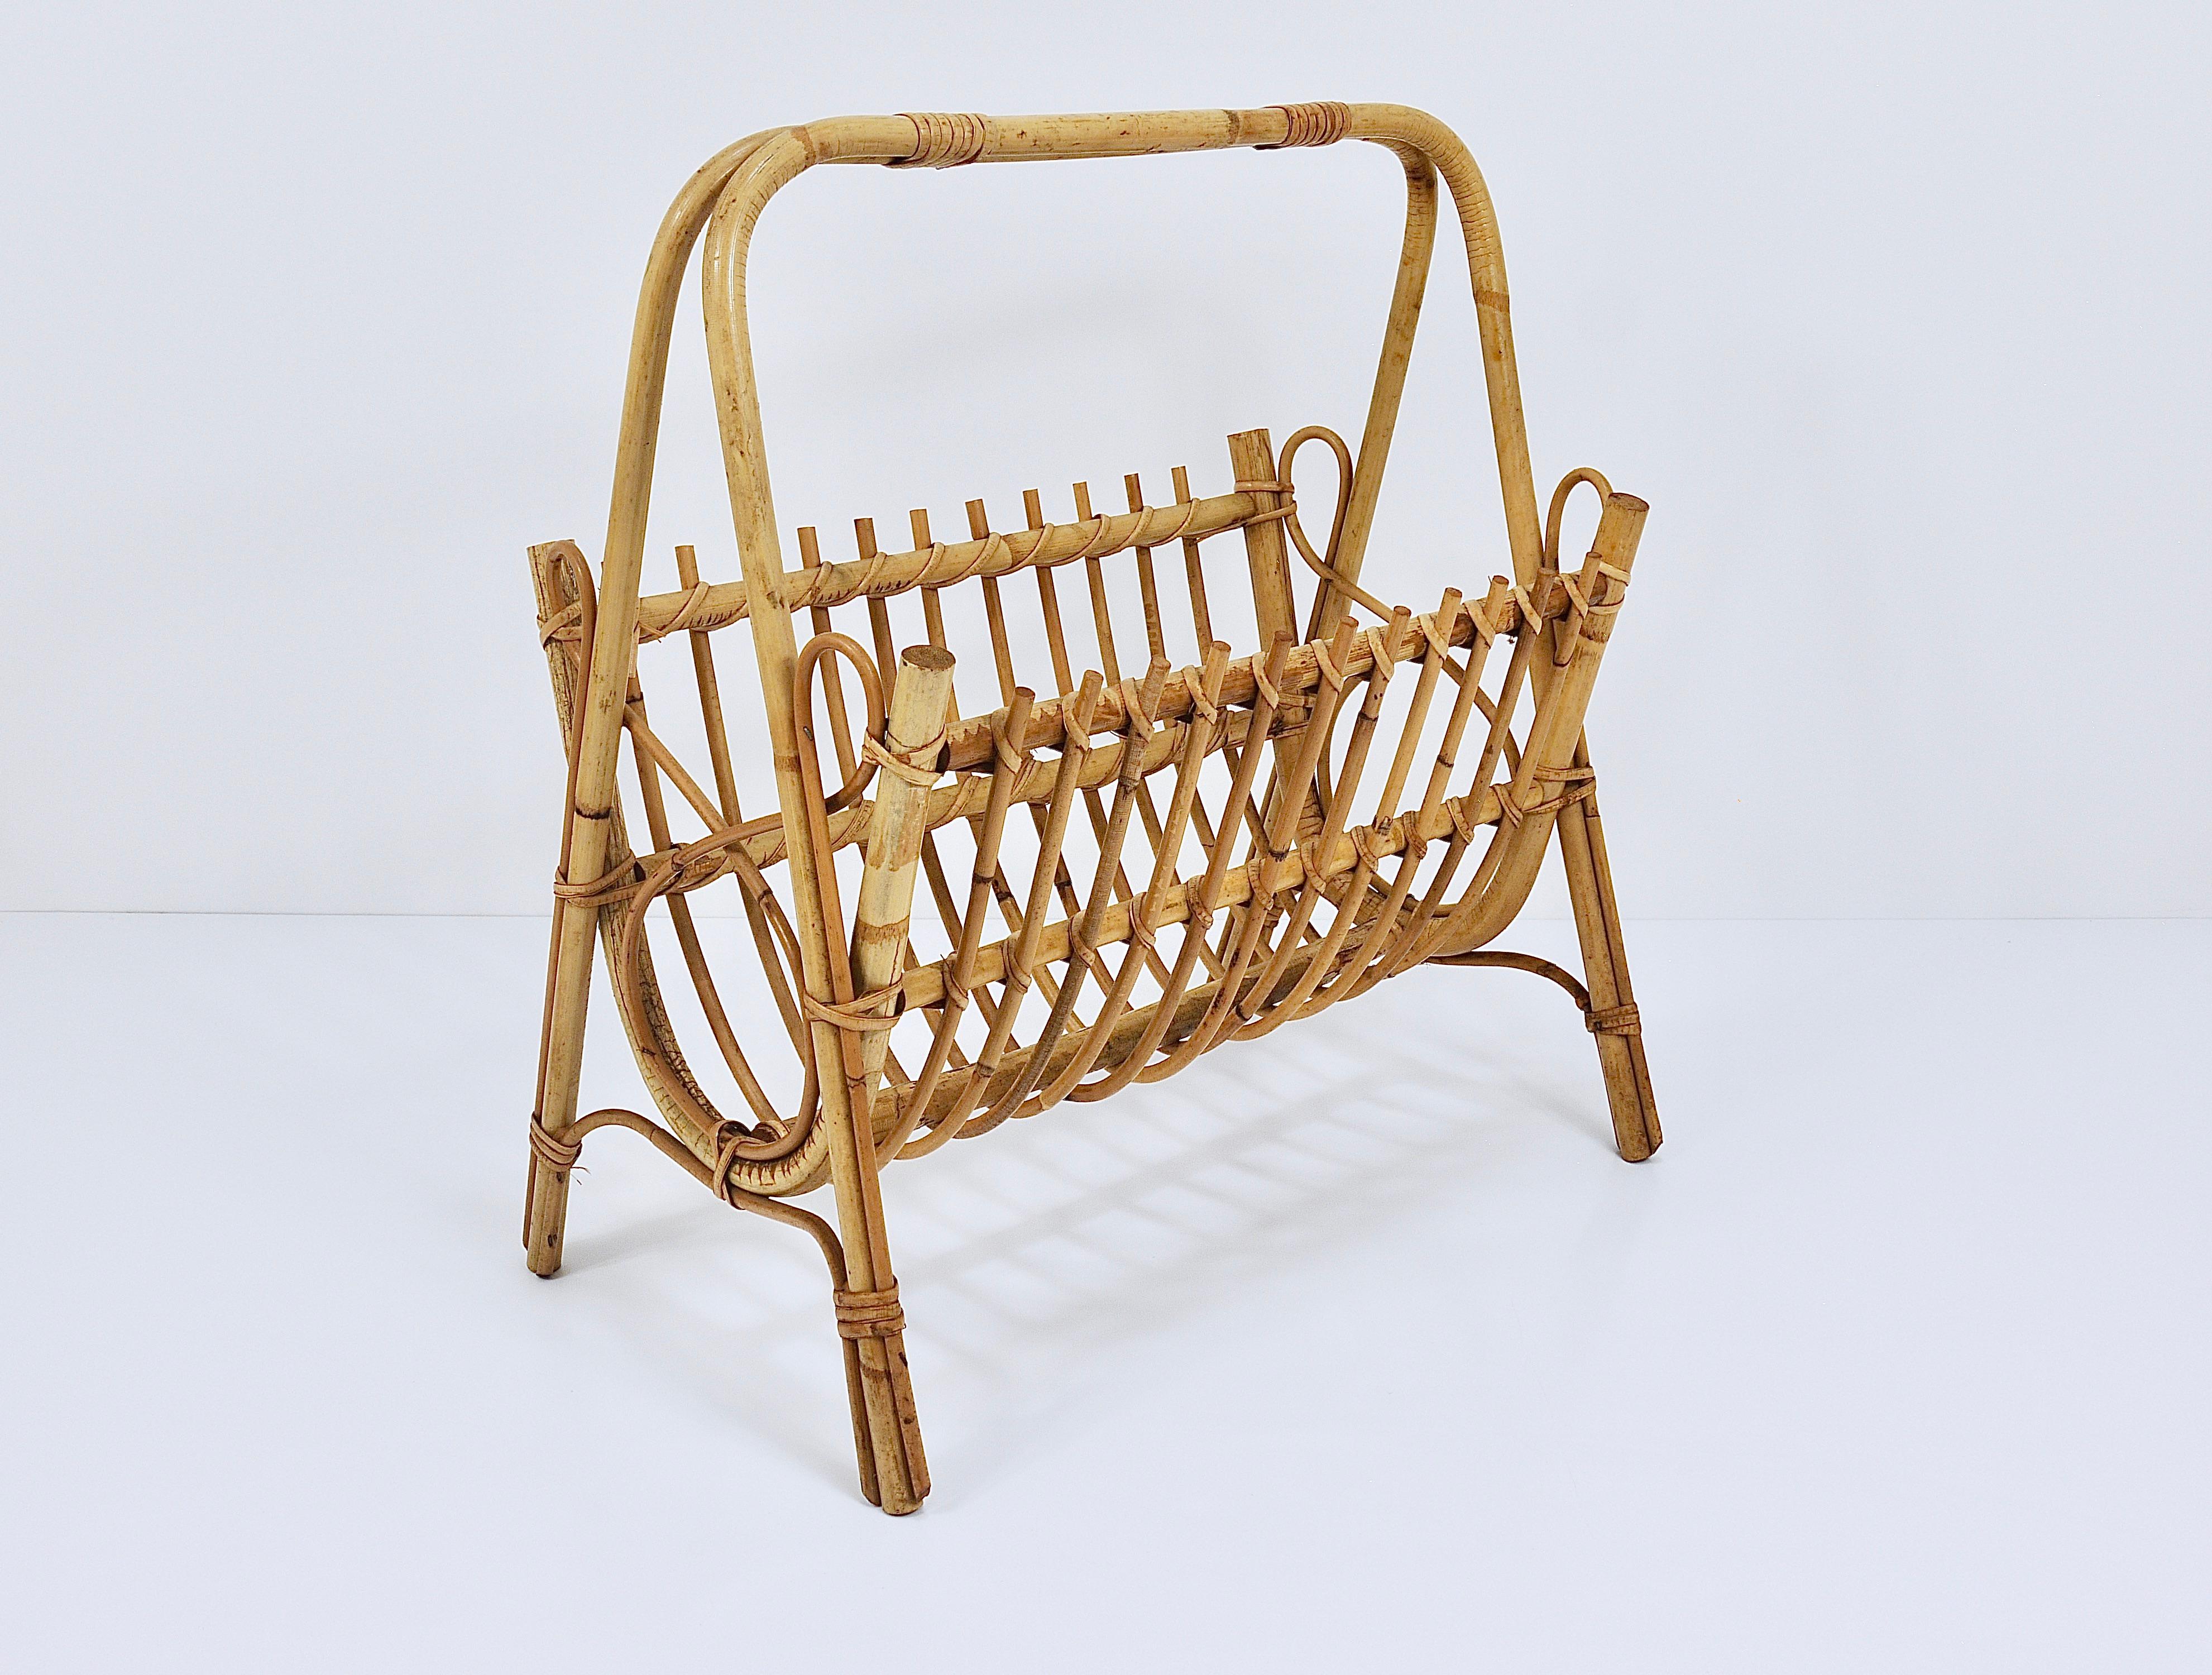 Franco Albini Style Rattan Bamboo Magazine Rack Newspaper Stand, France, 1950s For Sale 4